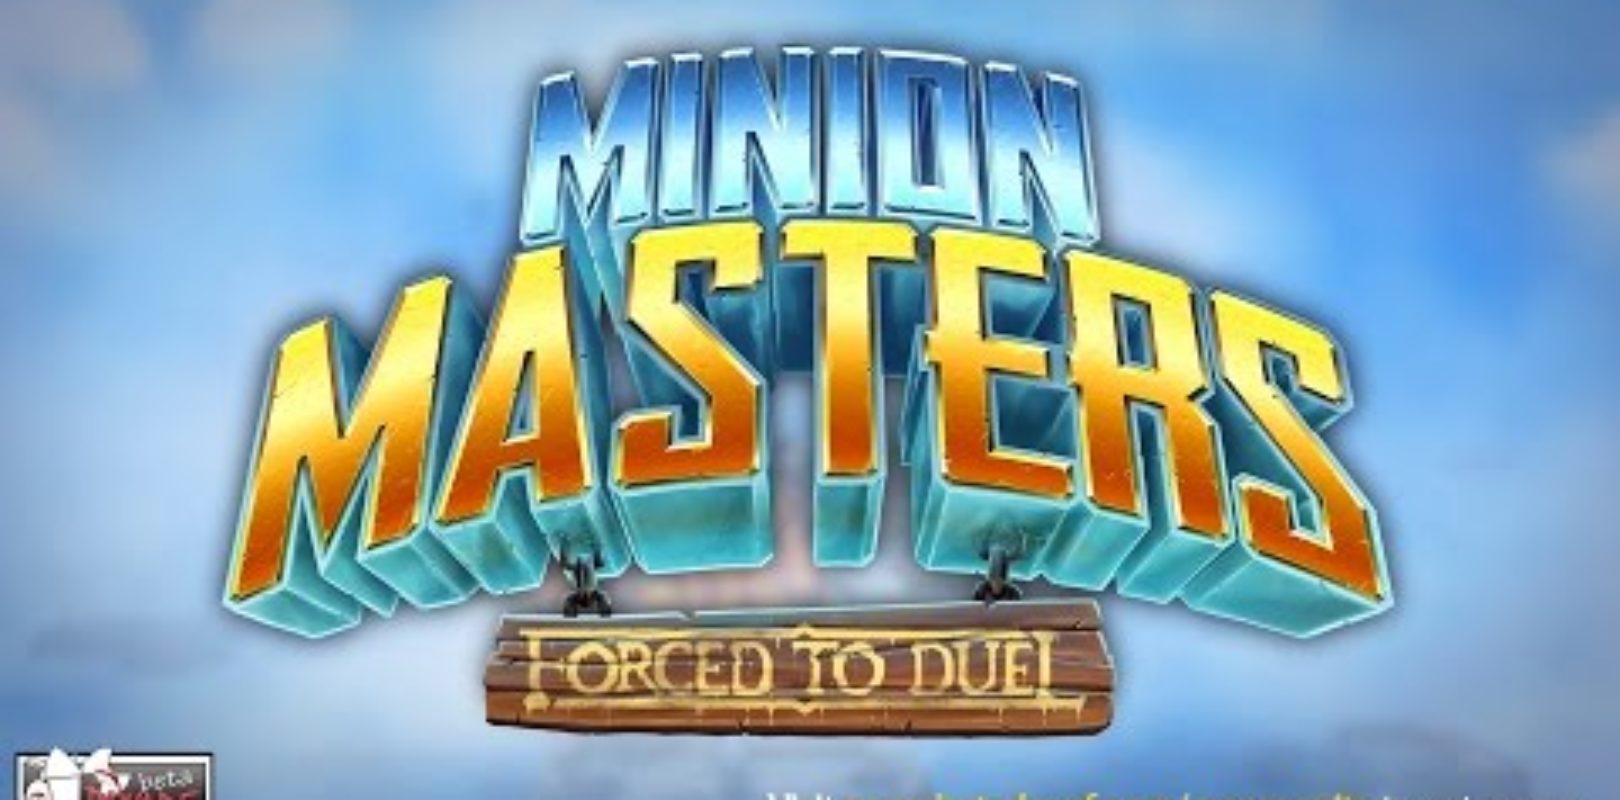 minion masters review